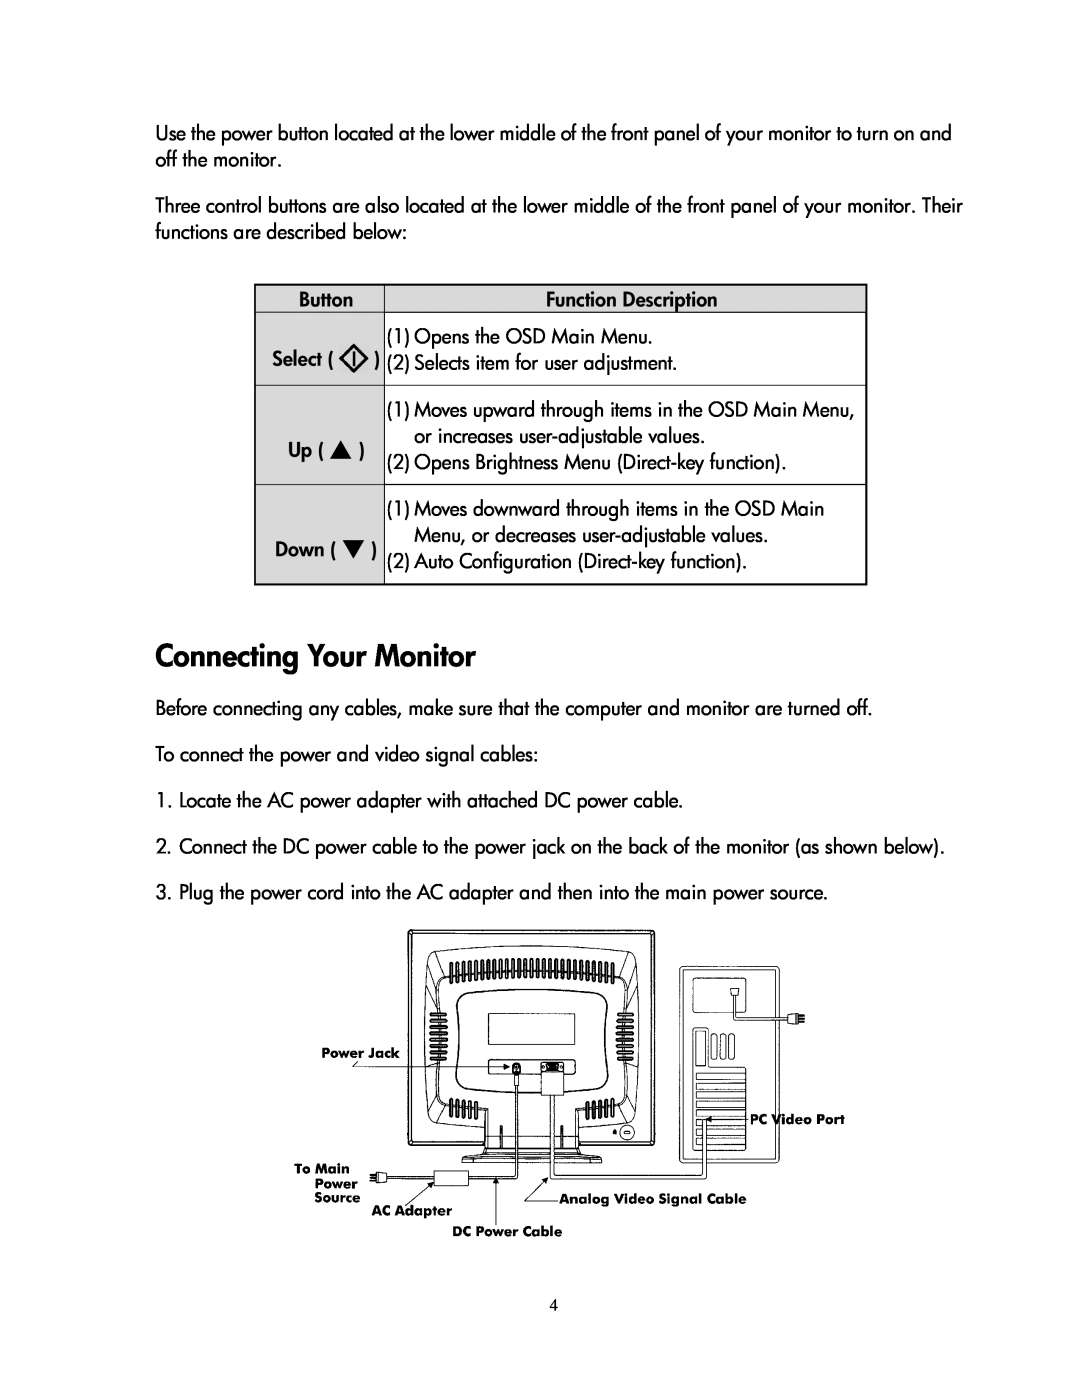 Compaq 1501 manual Connecting Your Monitor 